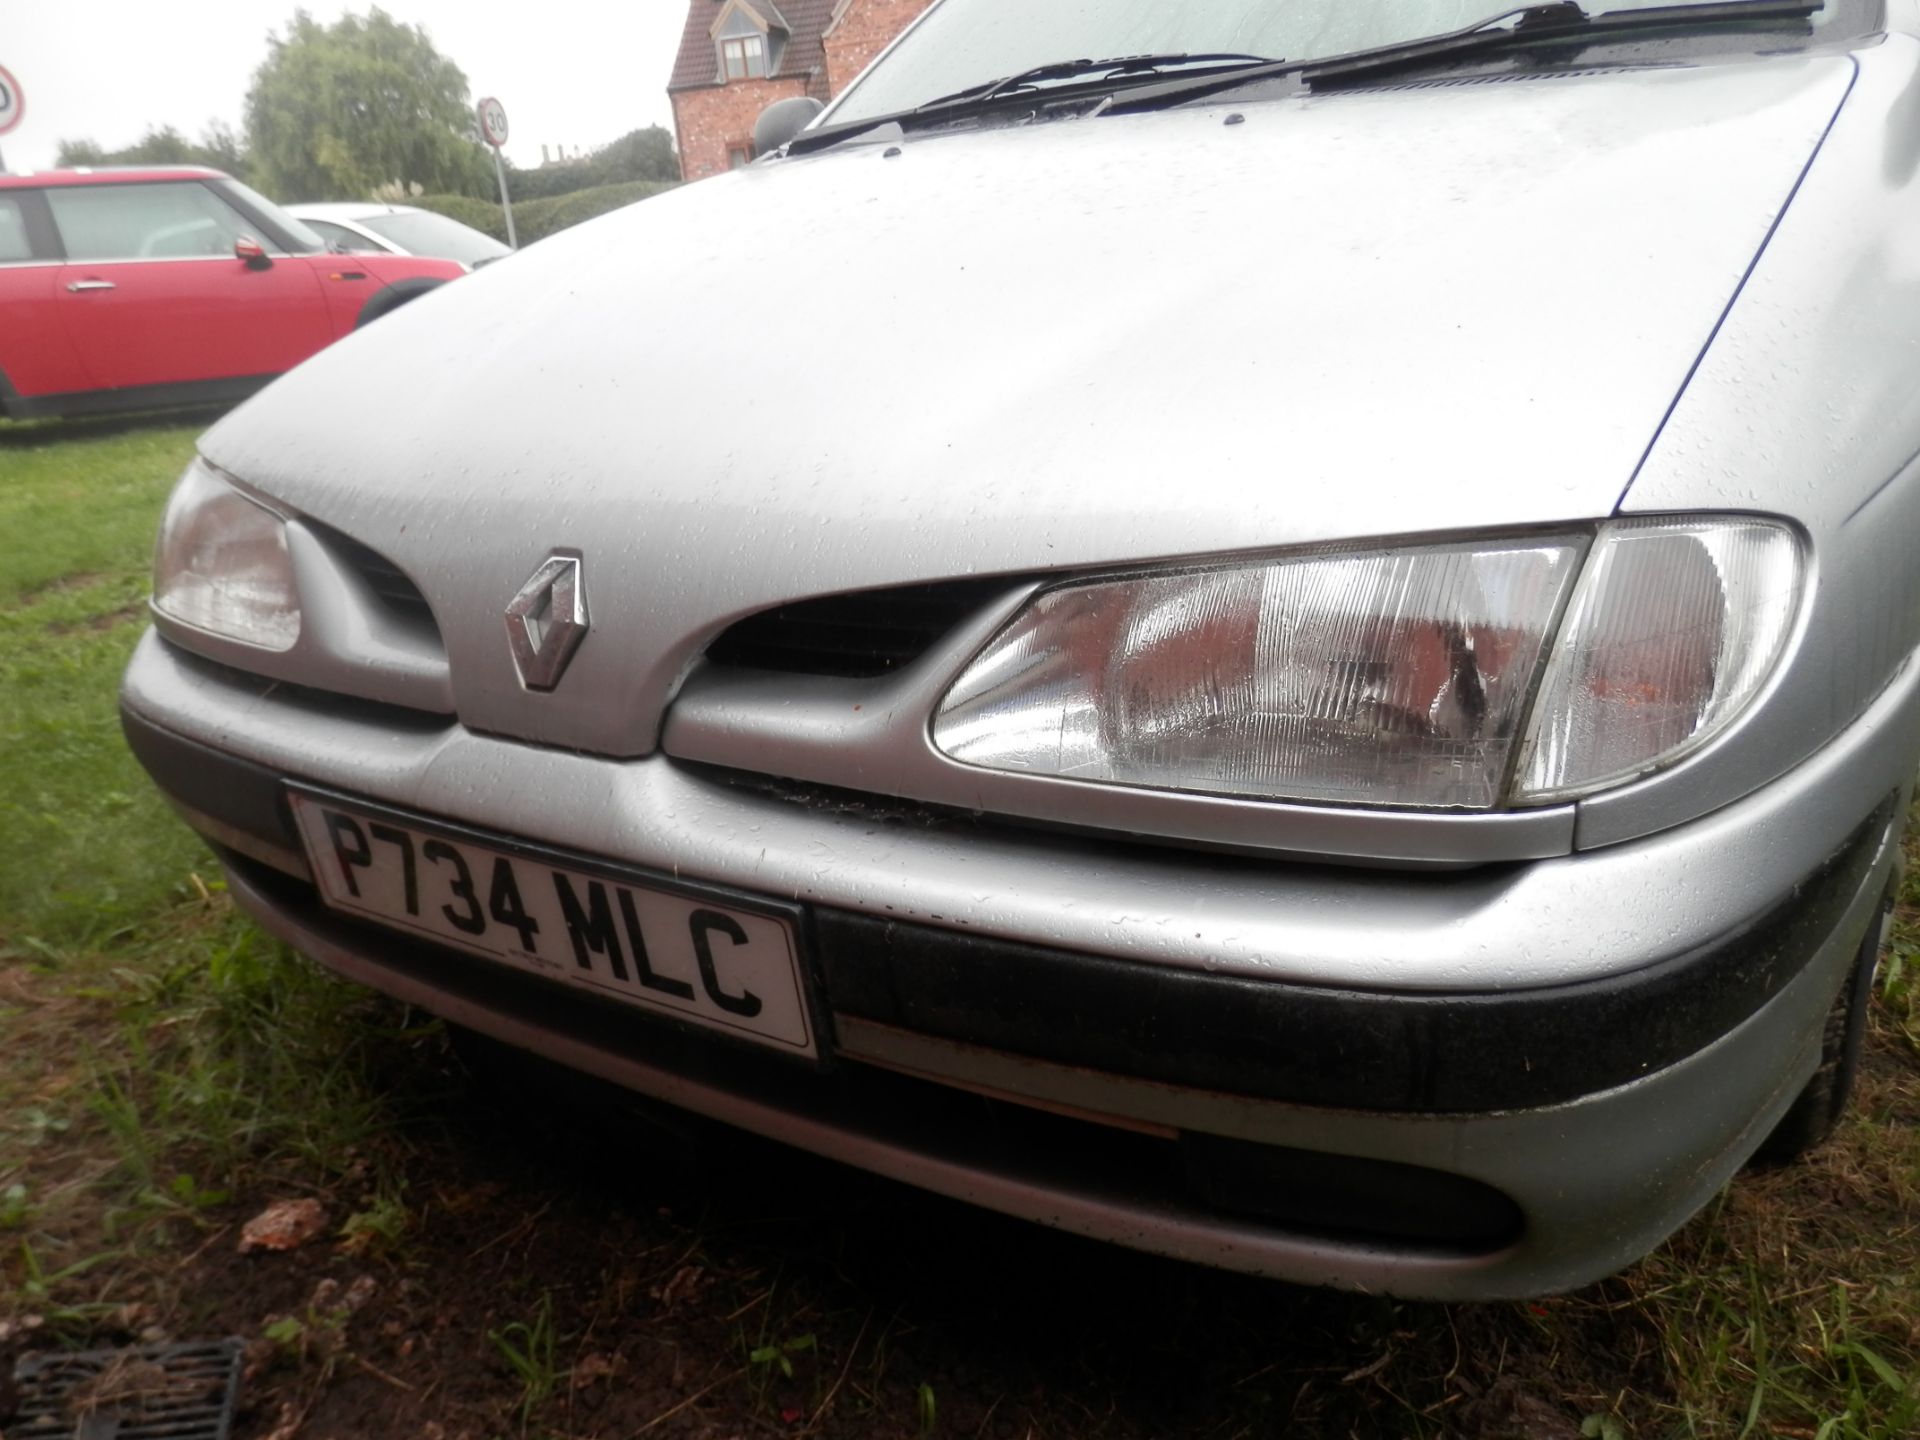 1996/P REG RENAULT MEGANE 1.6 PETROL, PX TRADE IN, WILL NOT START. TOO GOOD TO SCRAP !! NO RESERVE ! - Image 4 of 15